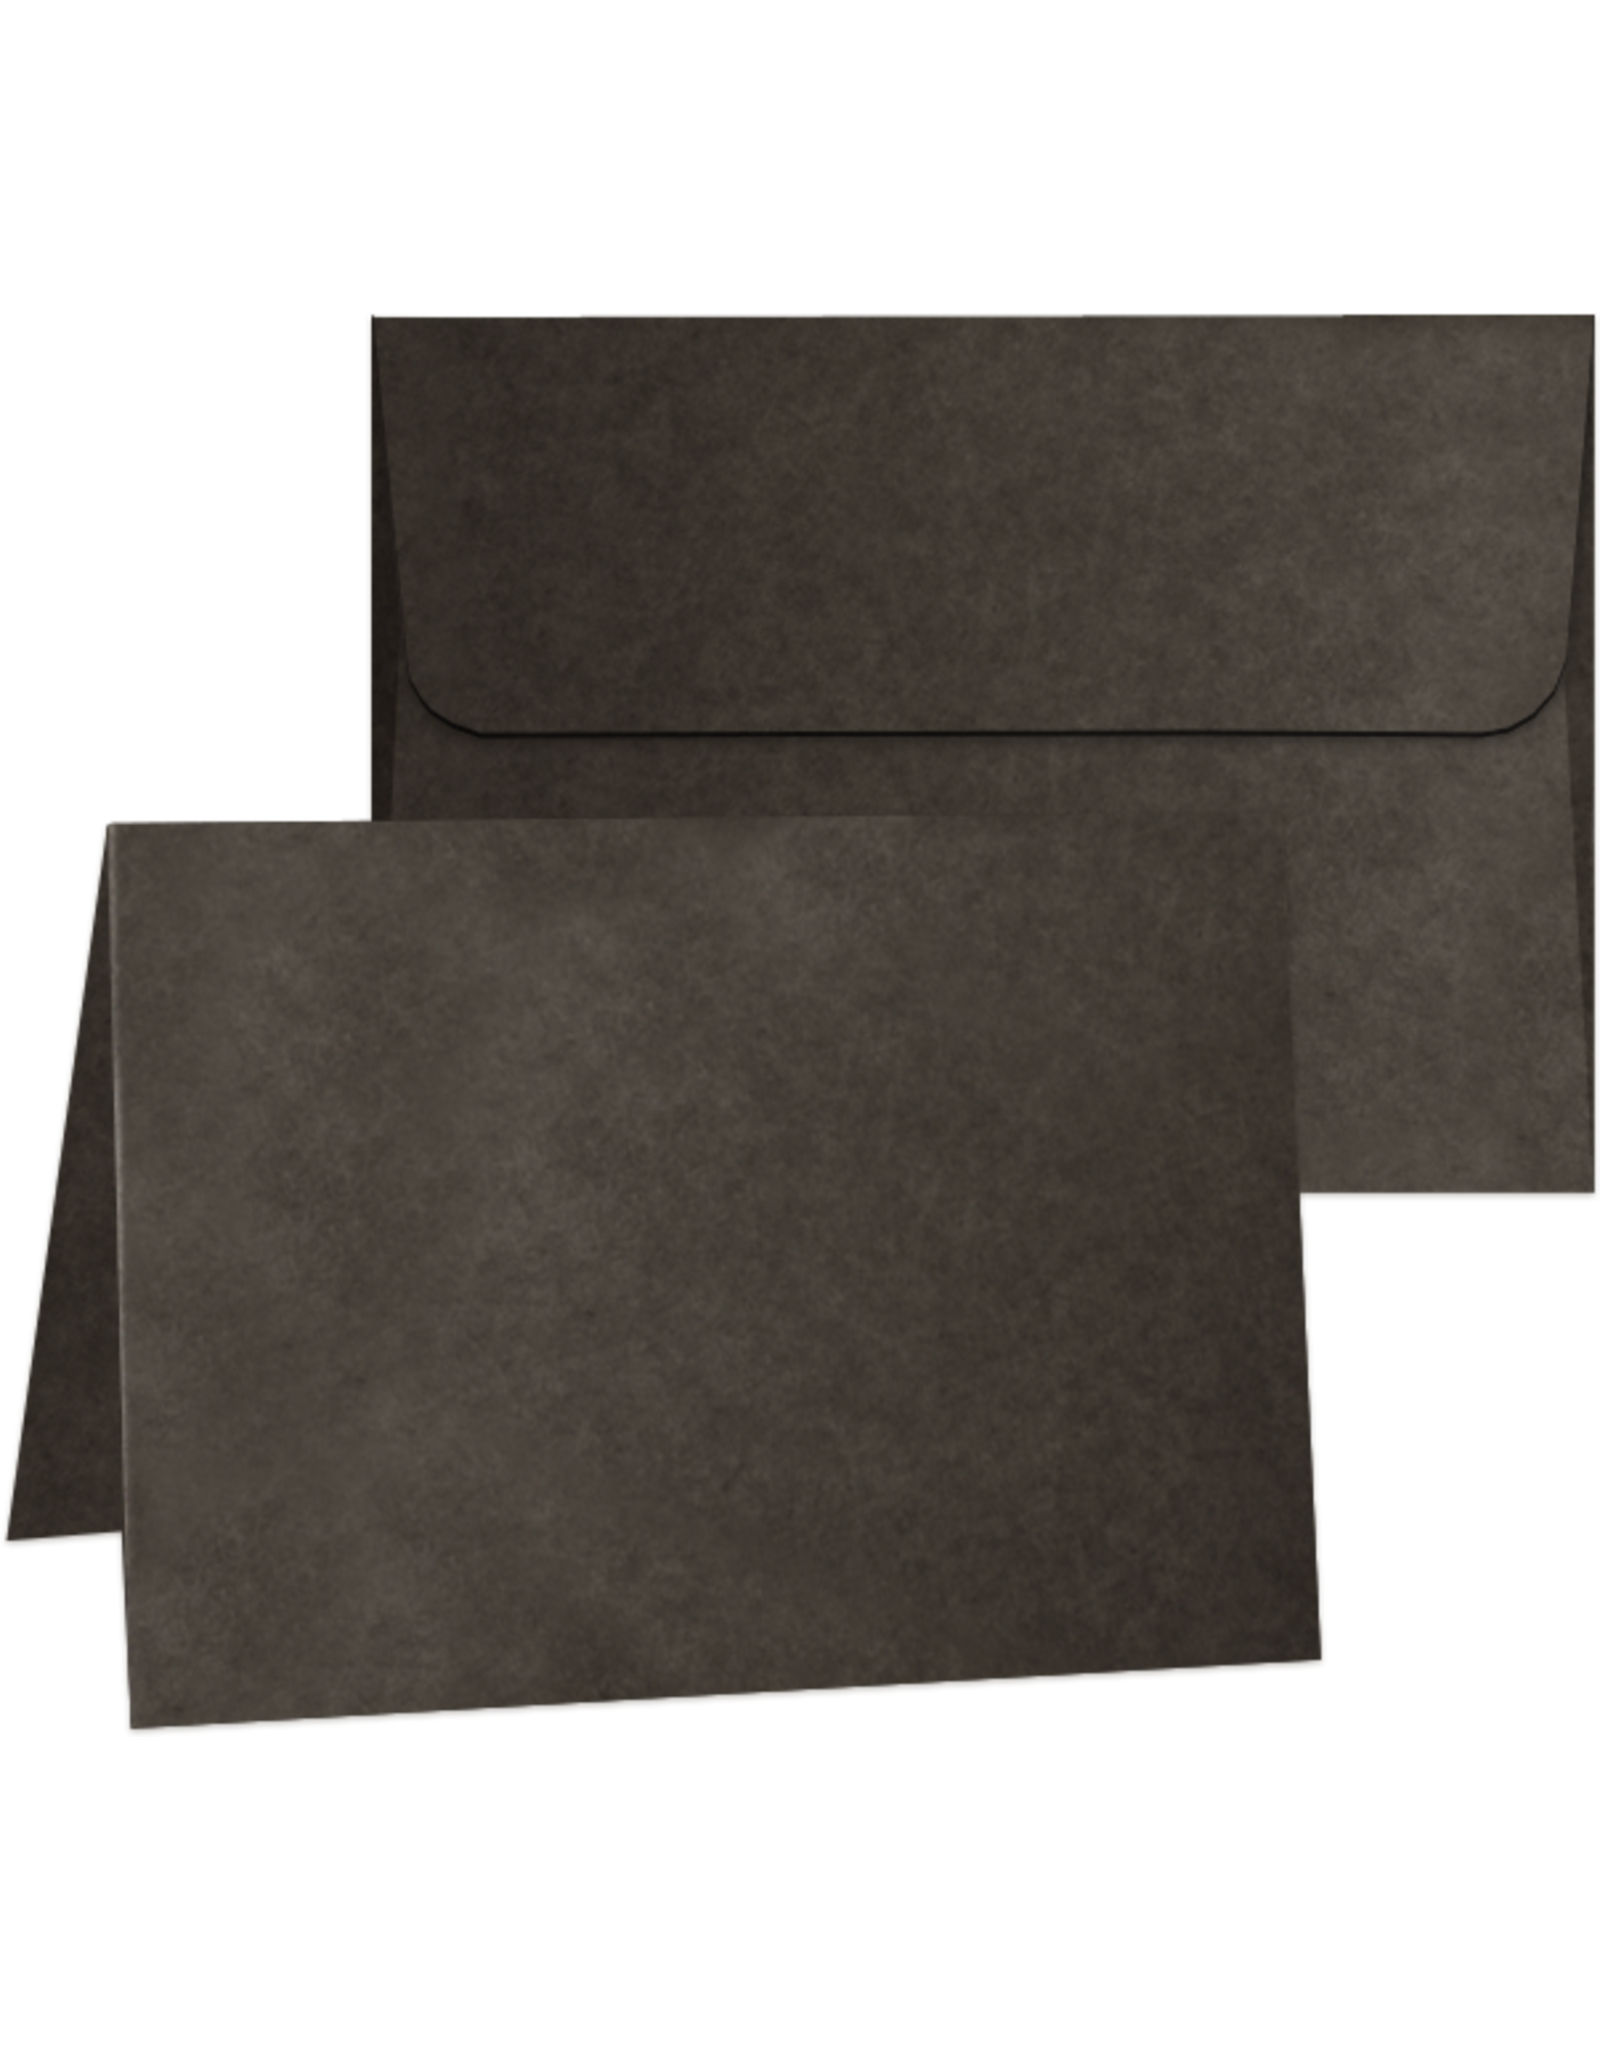 GRAPHIC 45 GRAPHIC 45 BLACK A7 CARDS WITH ENVELOPES 5x7 6/pk